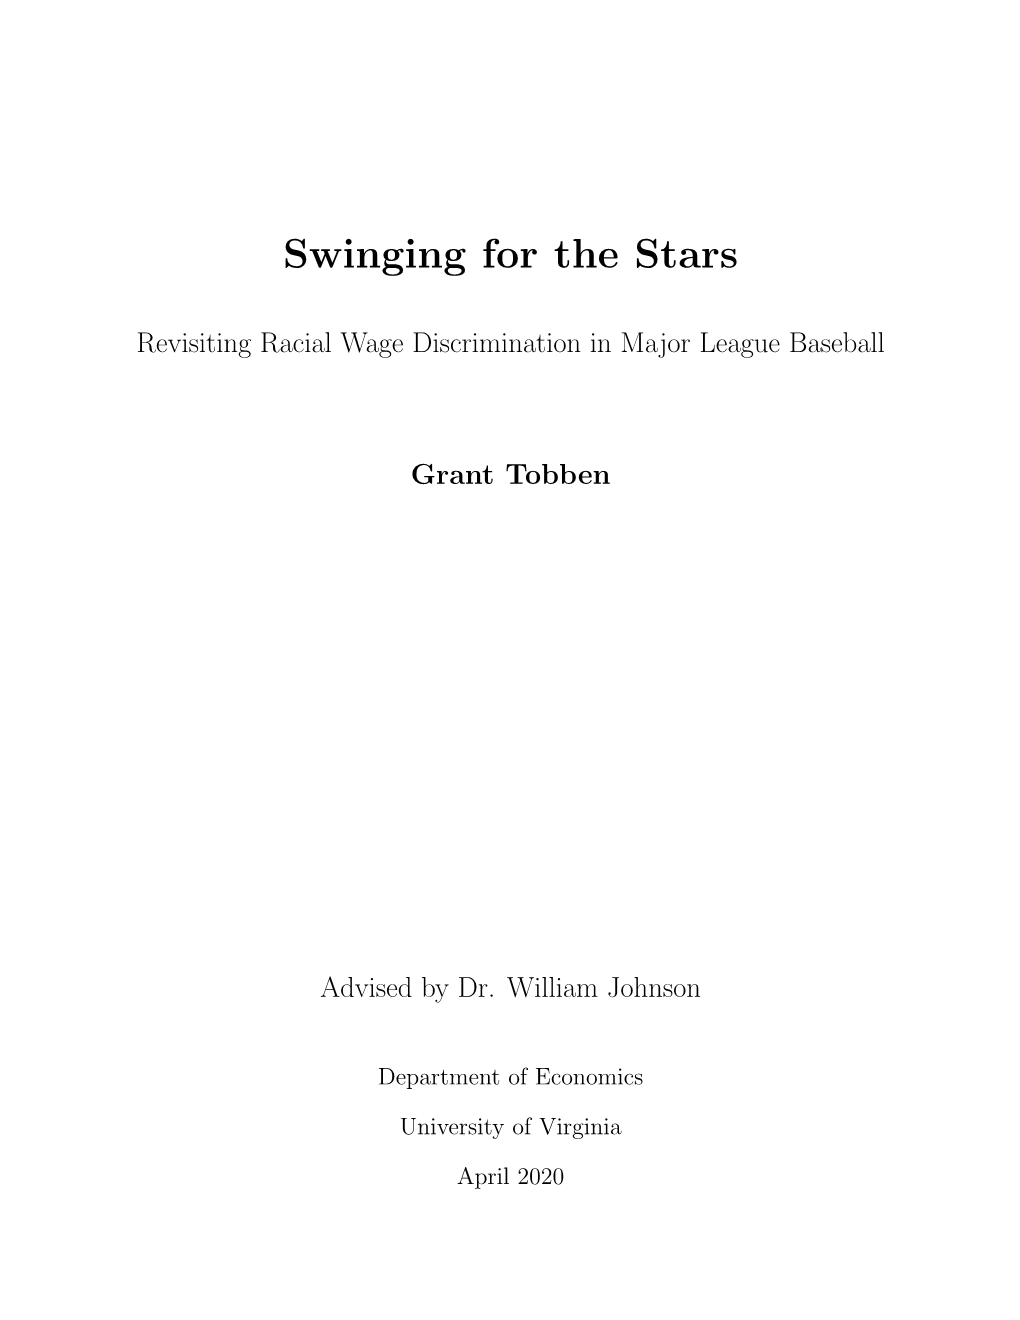 Swinging for the Stars: Revisiting Racial Wage